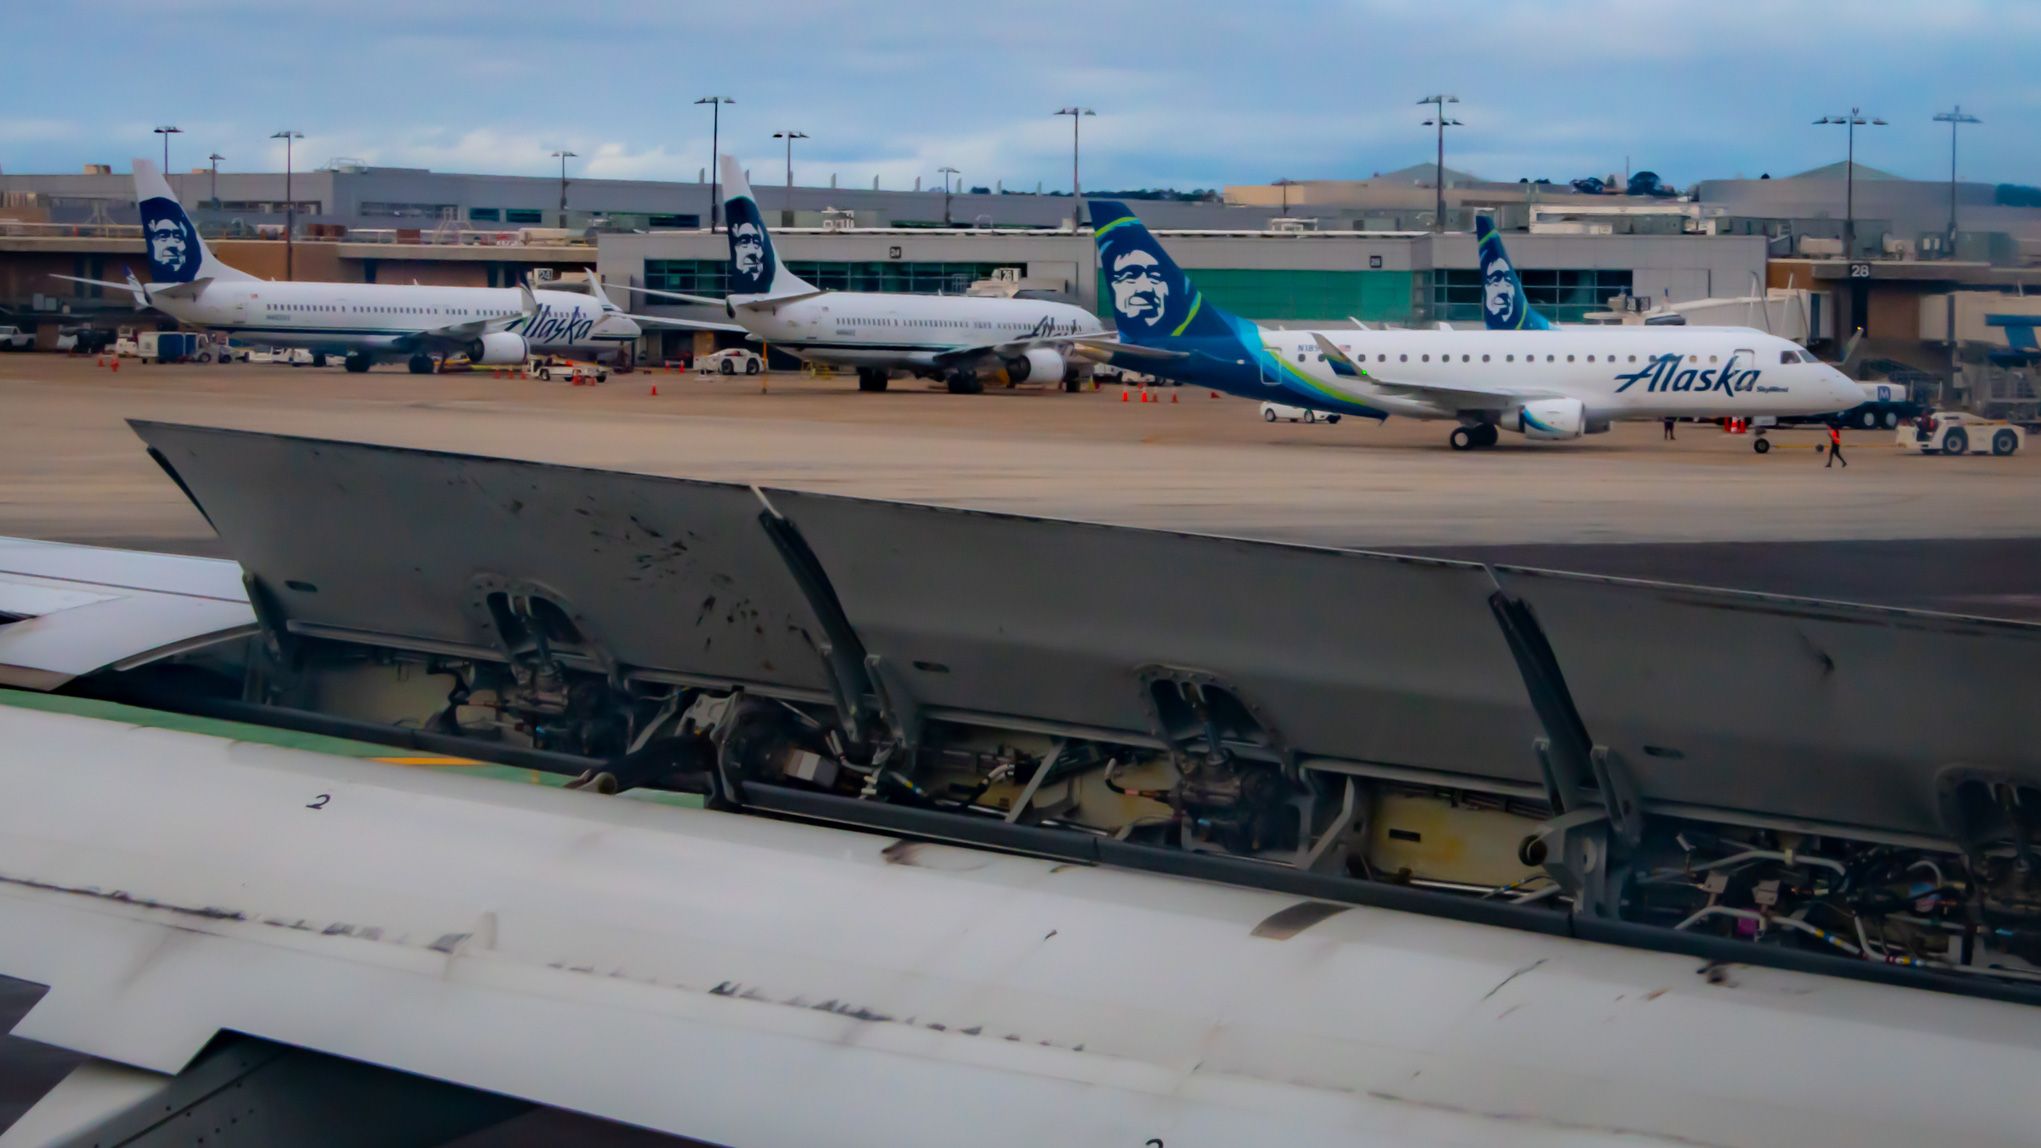 Peering Over the Deployed Speedbrake at Alaska Airlines Jets at the Gates - Boeing 737s and an Embraer 175